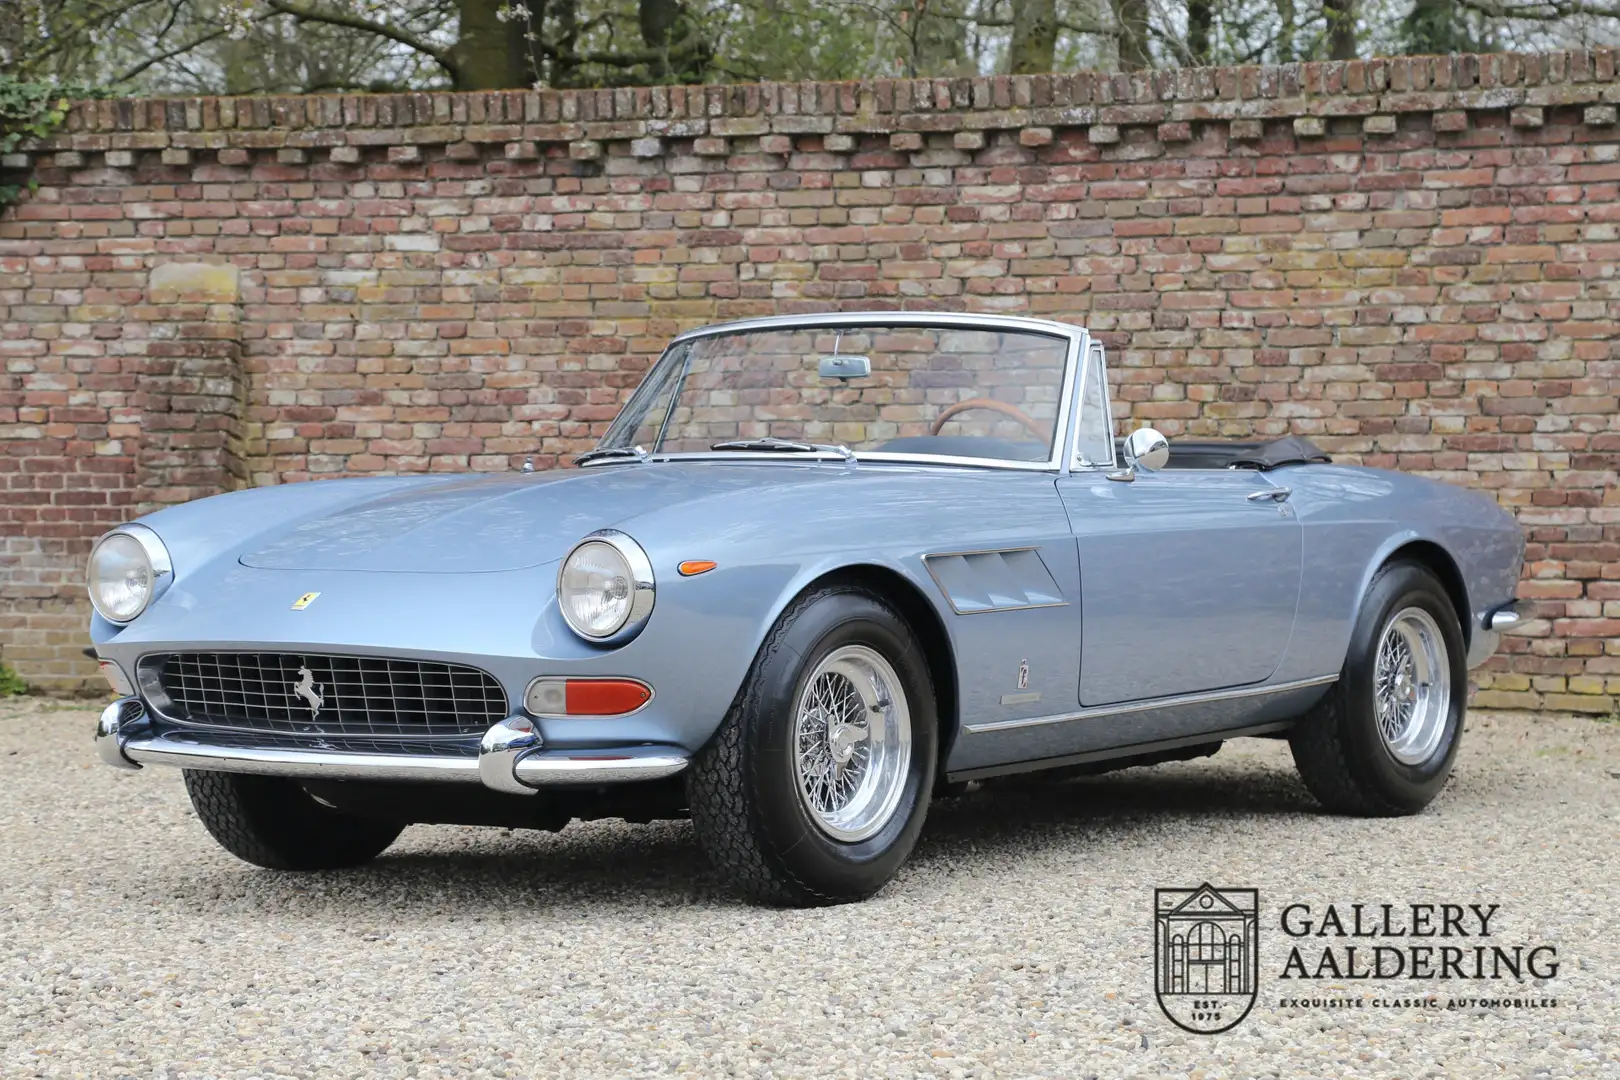 Ferrari 275 GTS 34000 Miles! Equipped with factory hard top, F Blue - 1